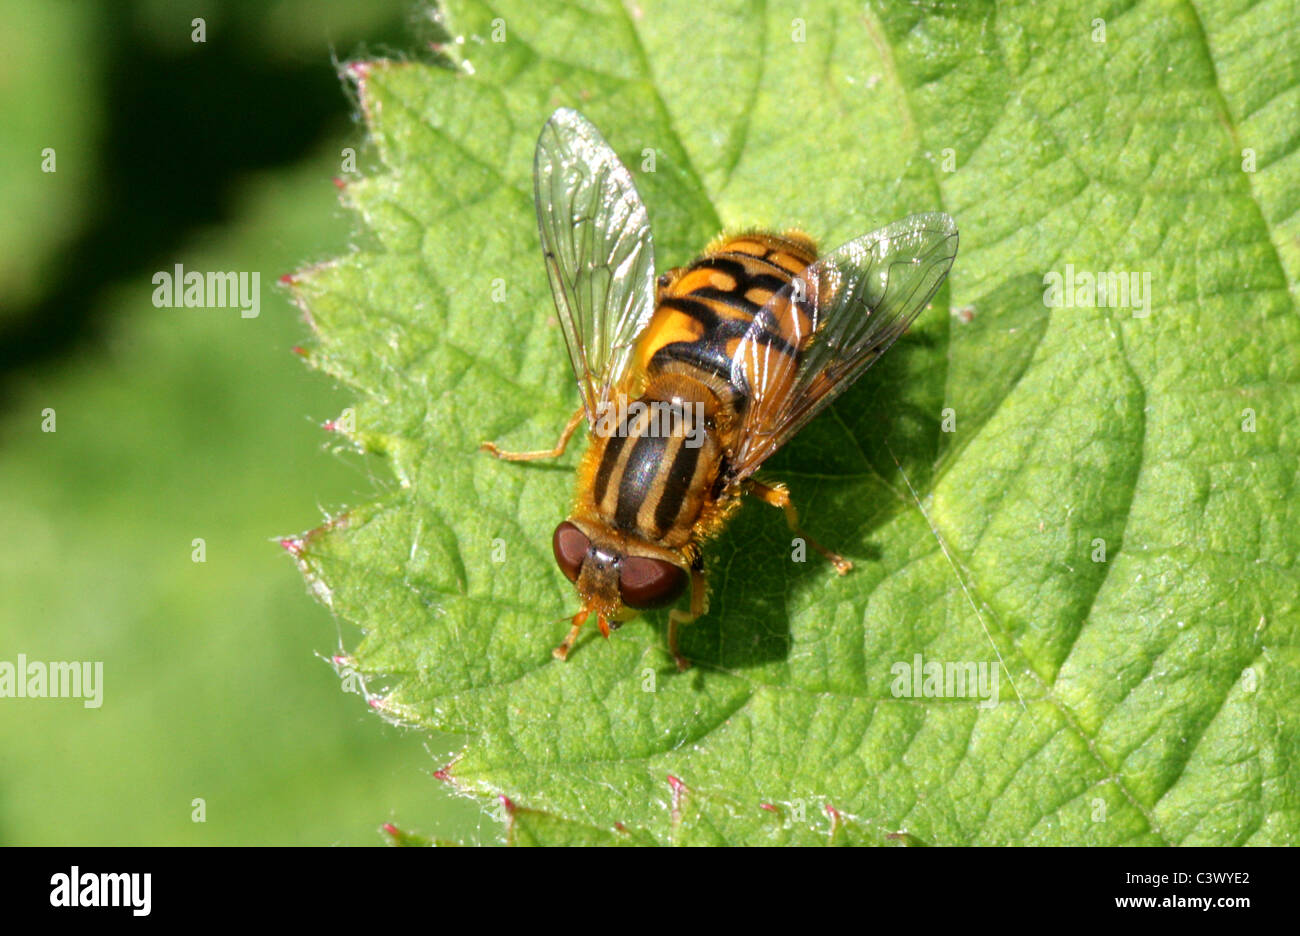 Sun Hoverfly, Brindled Hoverfly or Striped Hoverfly, Helophilus pendulus, Syrphidae, Diptera. Female. Stock Photo